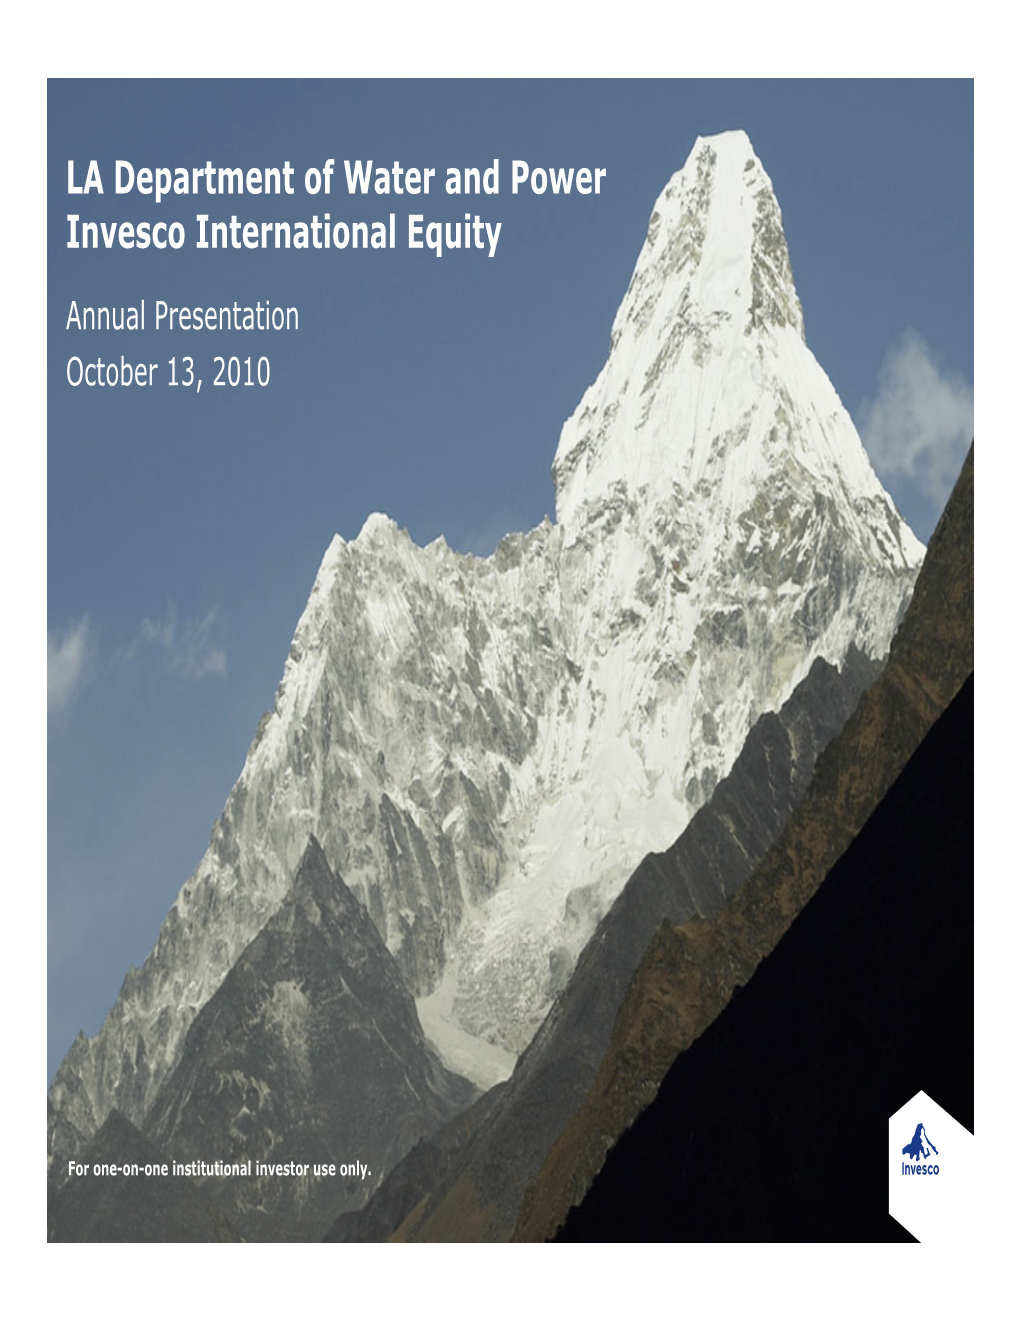 LA Department of Water and Power Invesco International Equity